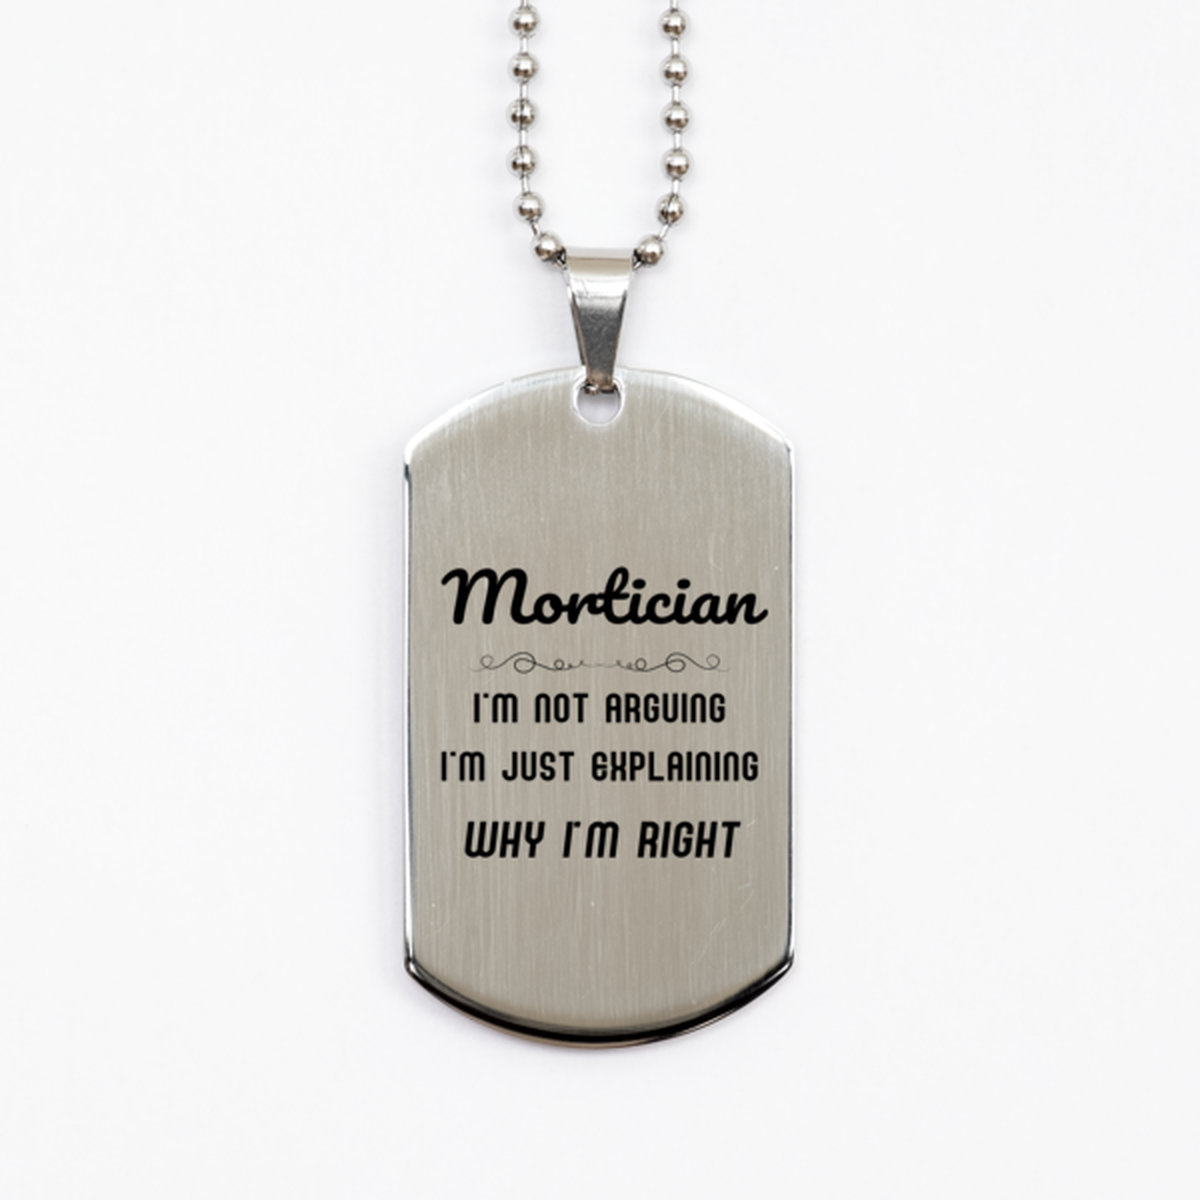 Mortician I'm not Arguing. I'm Just Explaining Why I'm RIGHT Silver Dog Tag, Funny Saying Quote Mortician Gifts For Mortician Graduation Birthday Christmas Gifts for Men Women Coworker